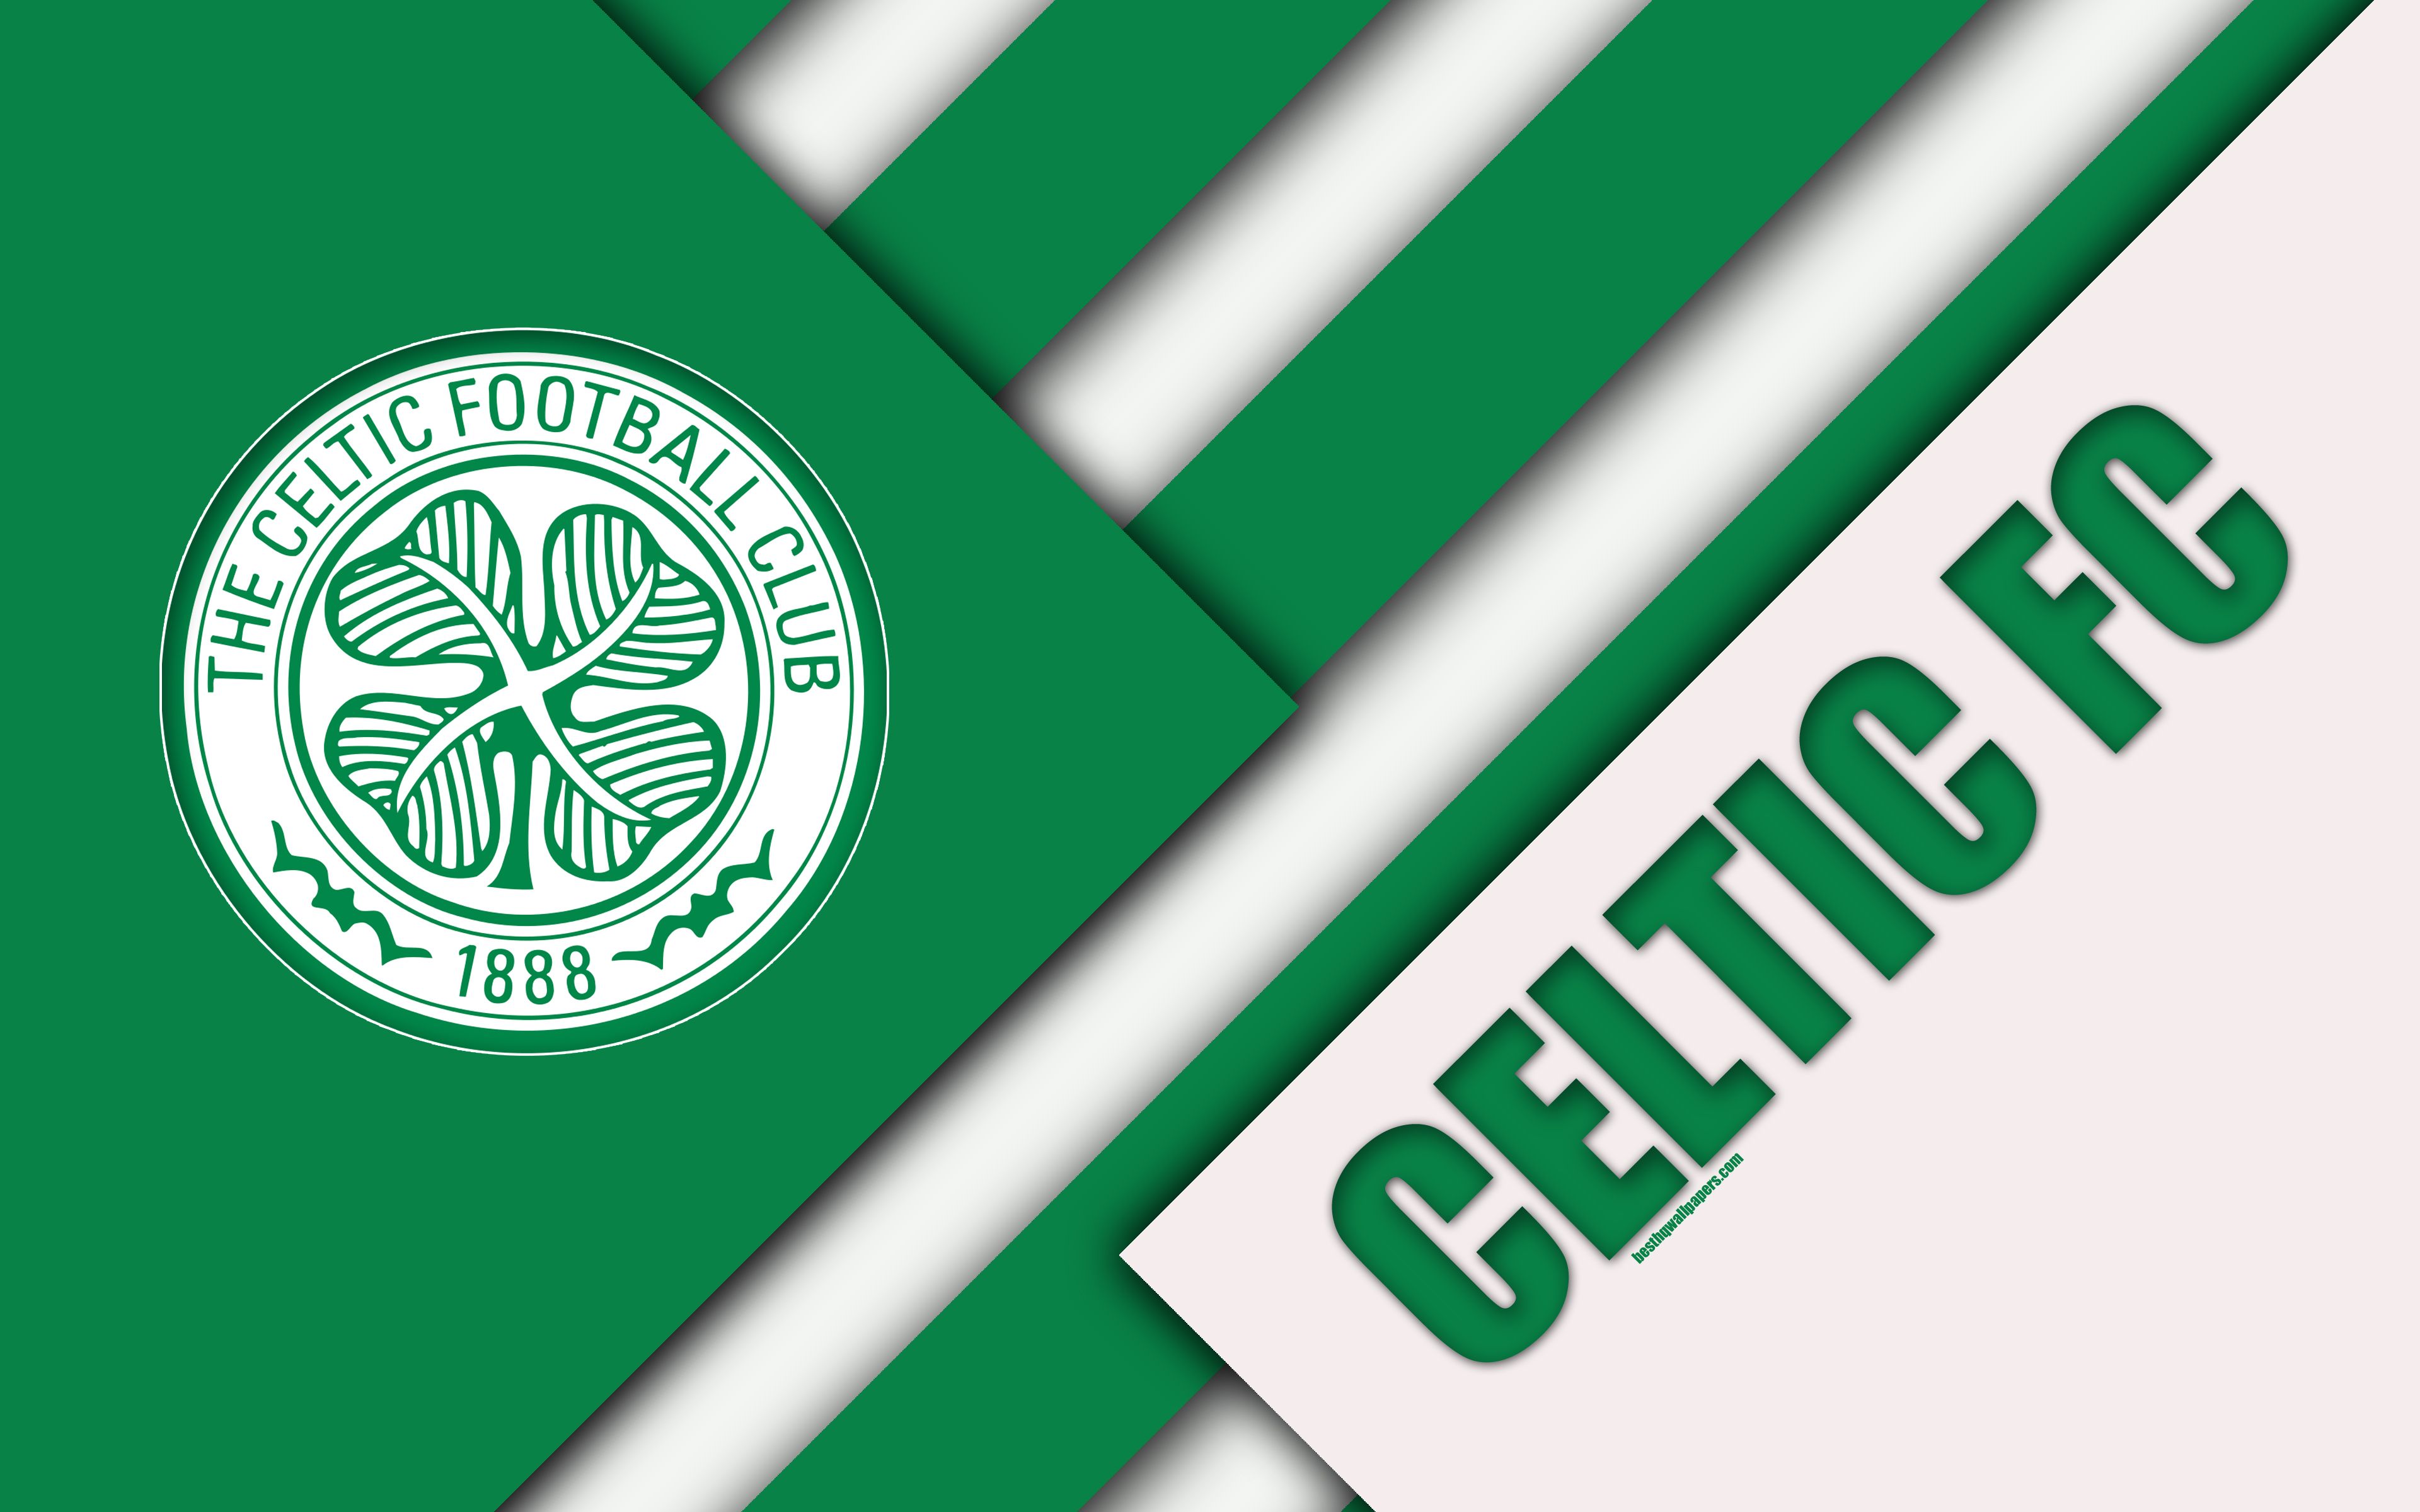 Download wallpaper Celtic FC, 4k, material design, Scottish football club, logo, green white abstraction, Scottish Premiership, Glasgow, Scotland, football for desktop with resolution 3840x2400. High Quality HD picture wallpaper